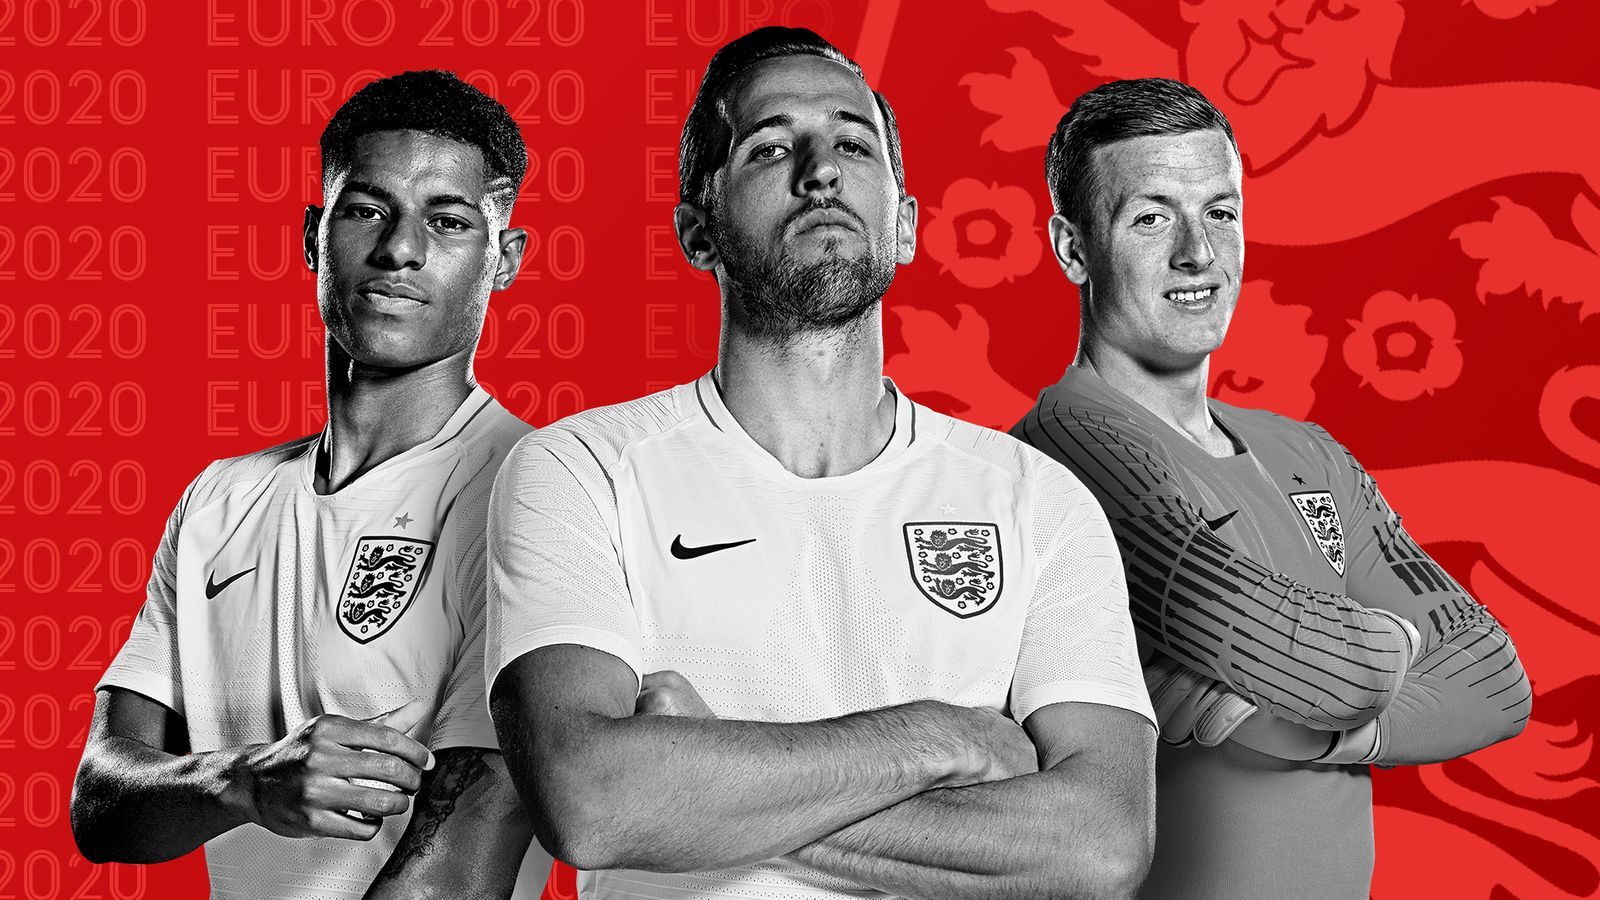 England's Euro 2020 squad: Who will make it? Hits and misses